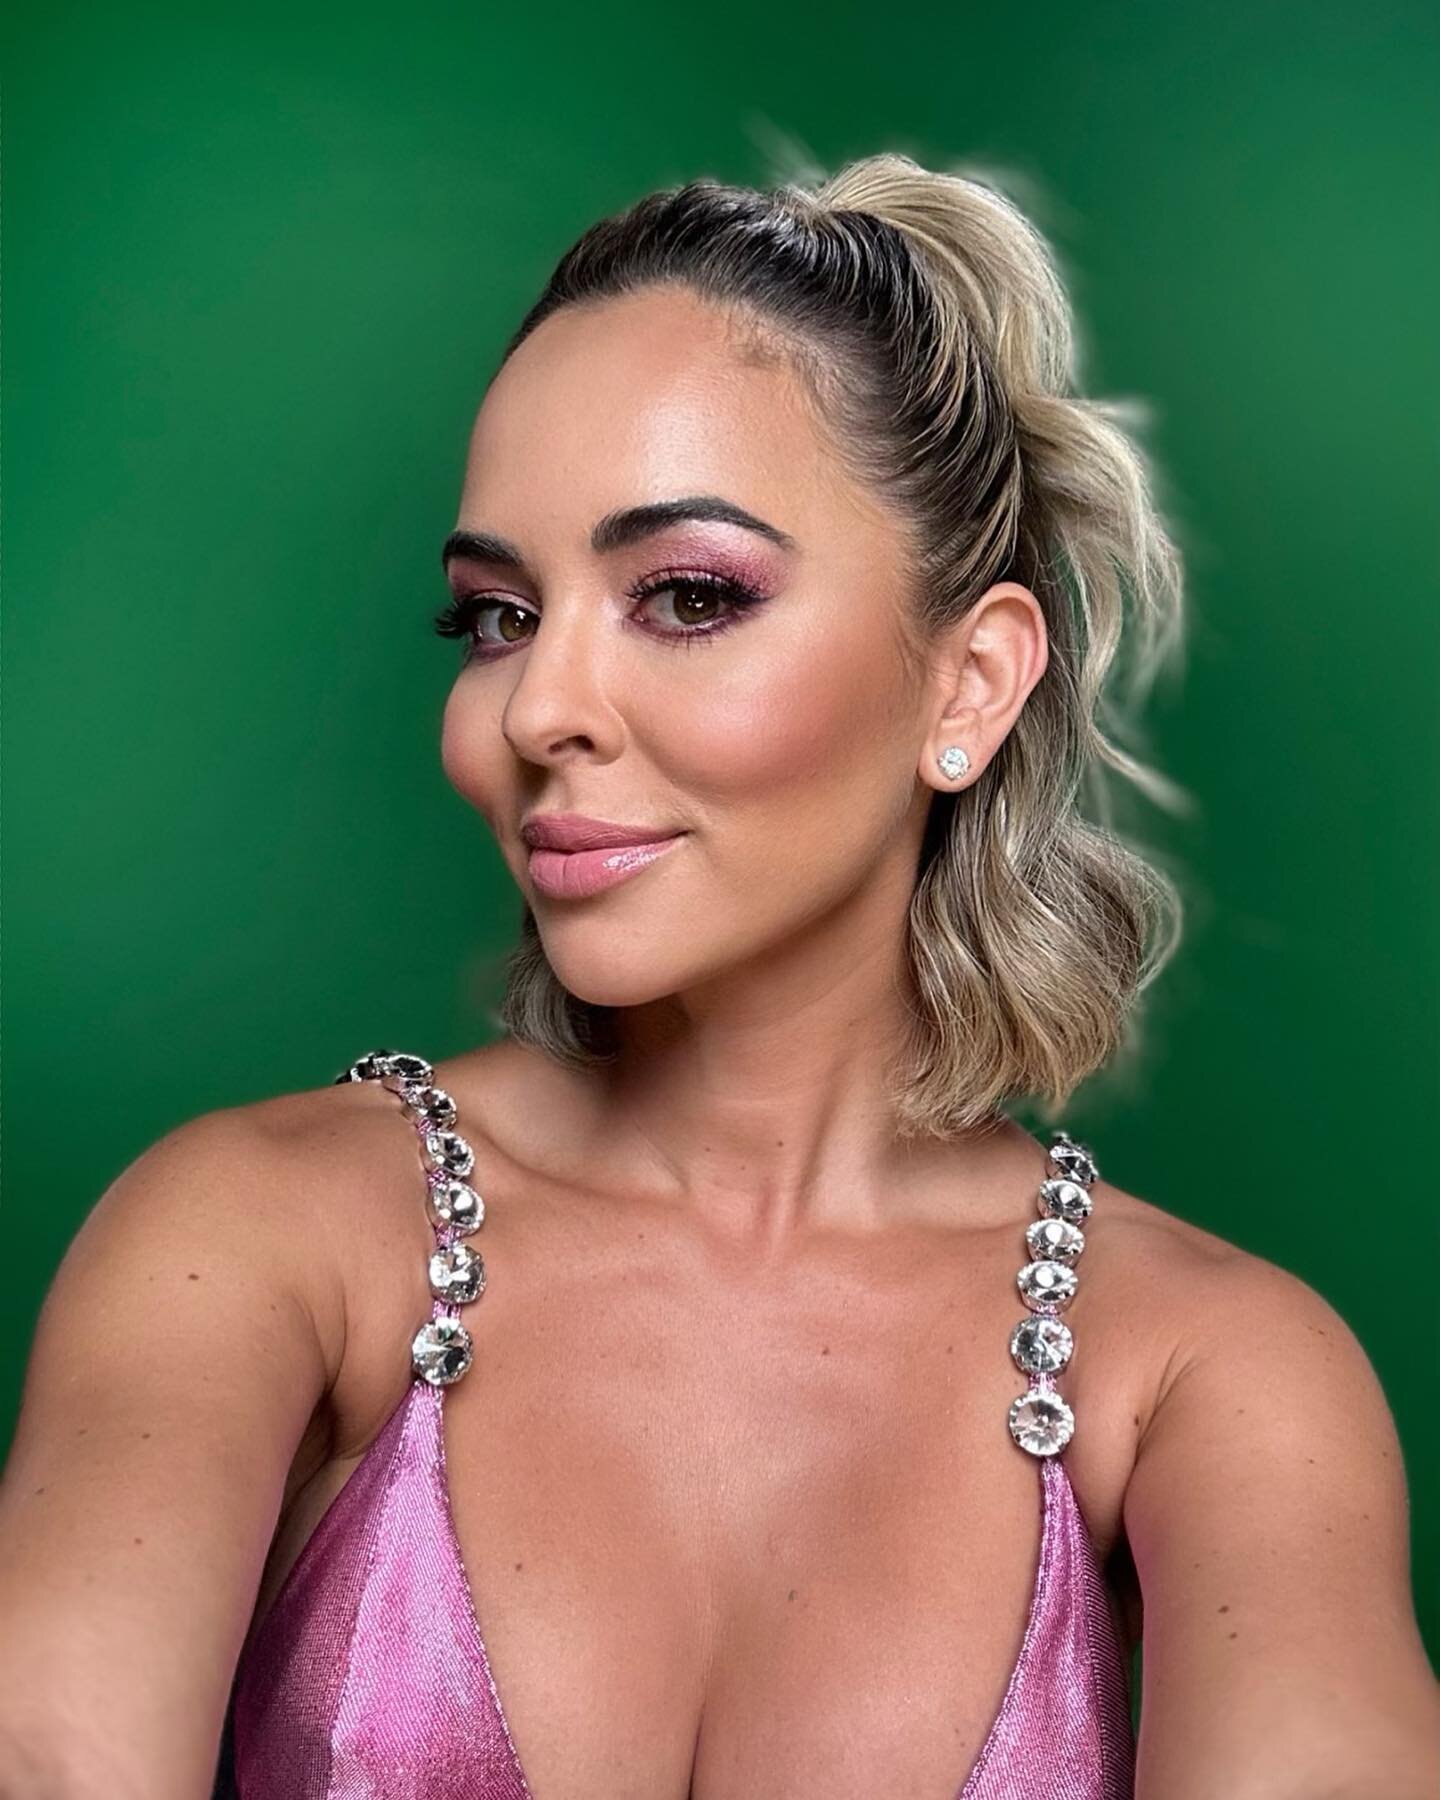 Can&rsquo;t get enough of this interview look for the fabulous @drnicolemartin 

Loved playing up the look with @hudabeauty naughty nude eyeshadow palette to bring out the pink/violet tones in her dress. 

Make up and Hair By Grace ✨